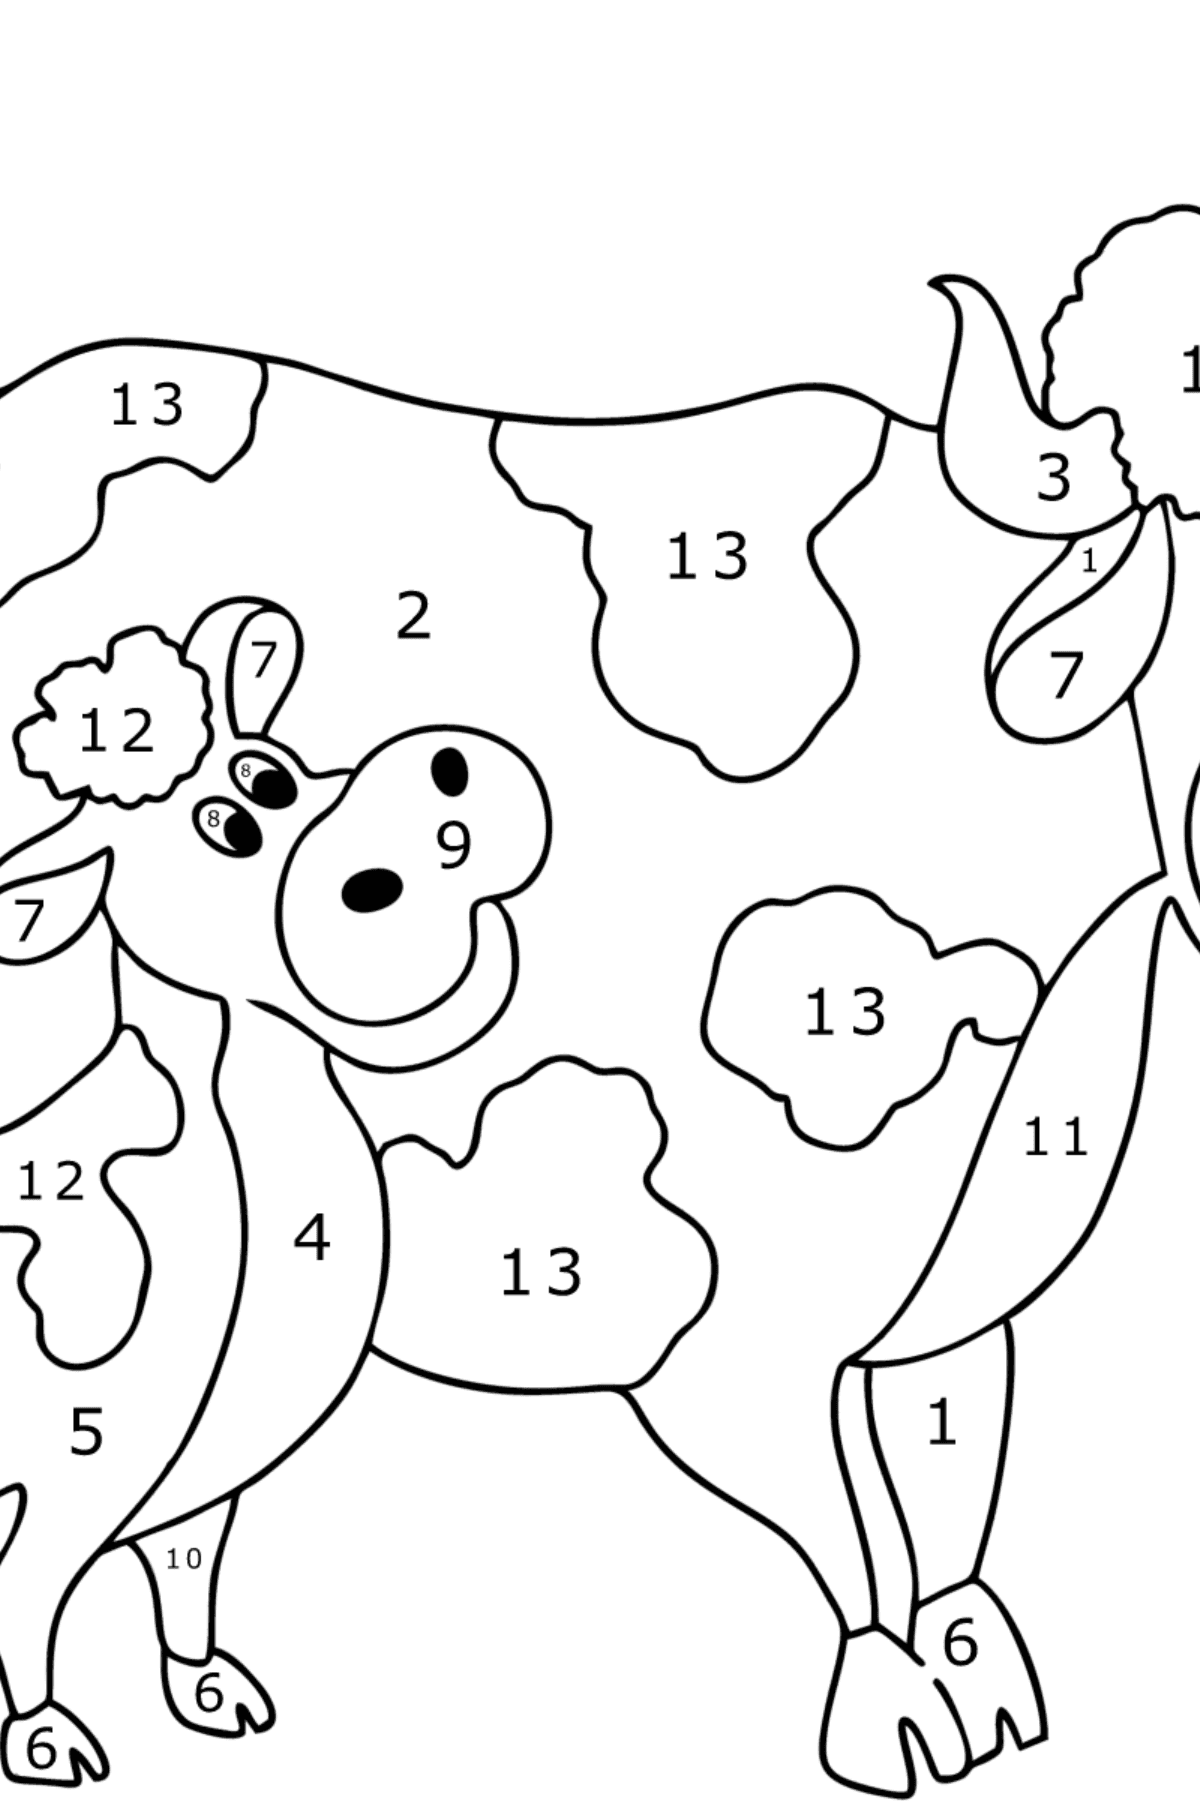 Cow and calf coloring pages - Coloring by Numbers for Kids